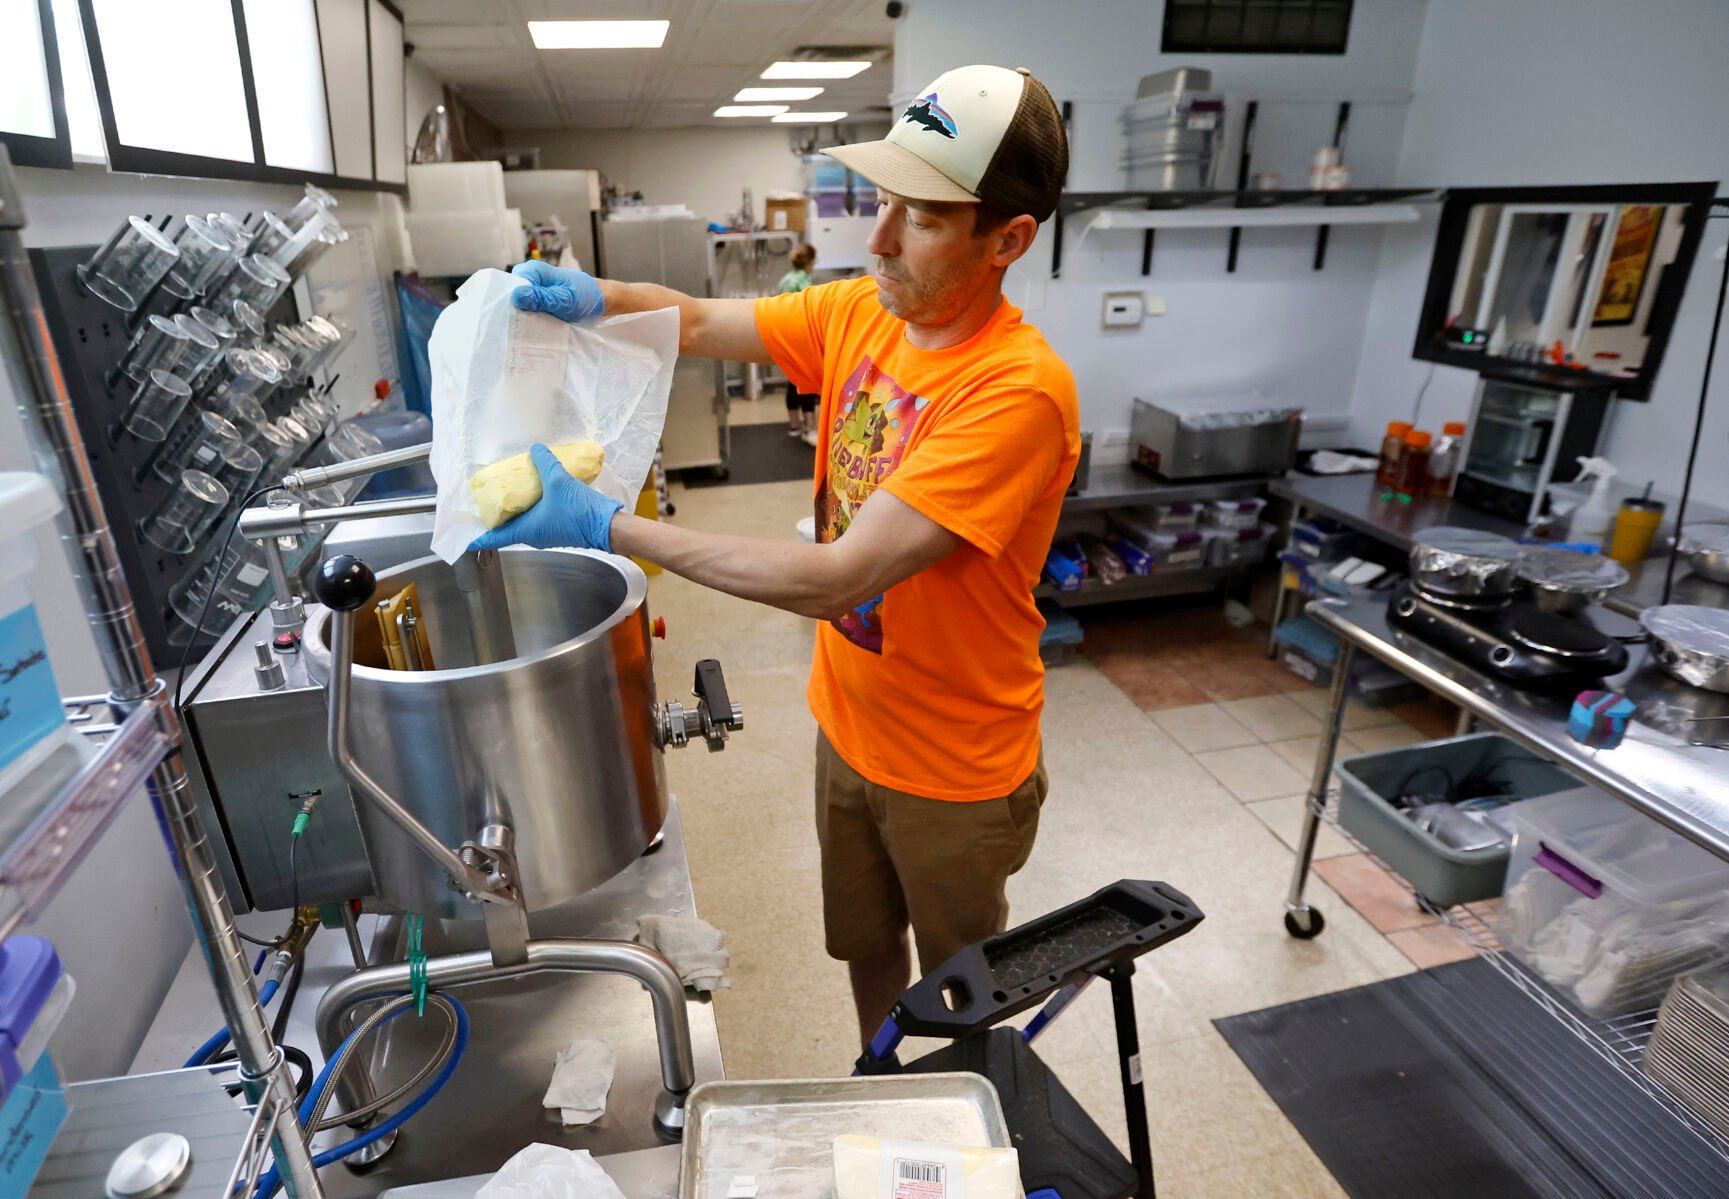 Josh McGinnis makes caramel at River Bluff Collective in East Dubuque, Ill., on Thursday, April 13, 2023.    PHOTO CREDIT: JESSICA REILLY
Telegraph Herald